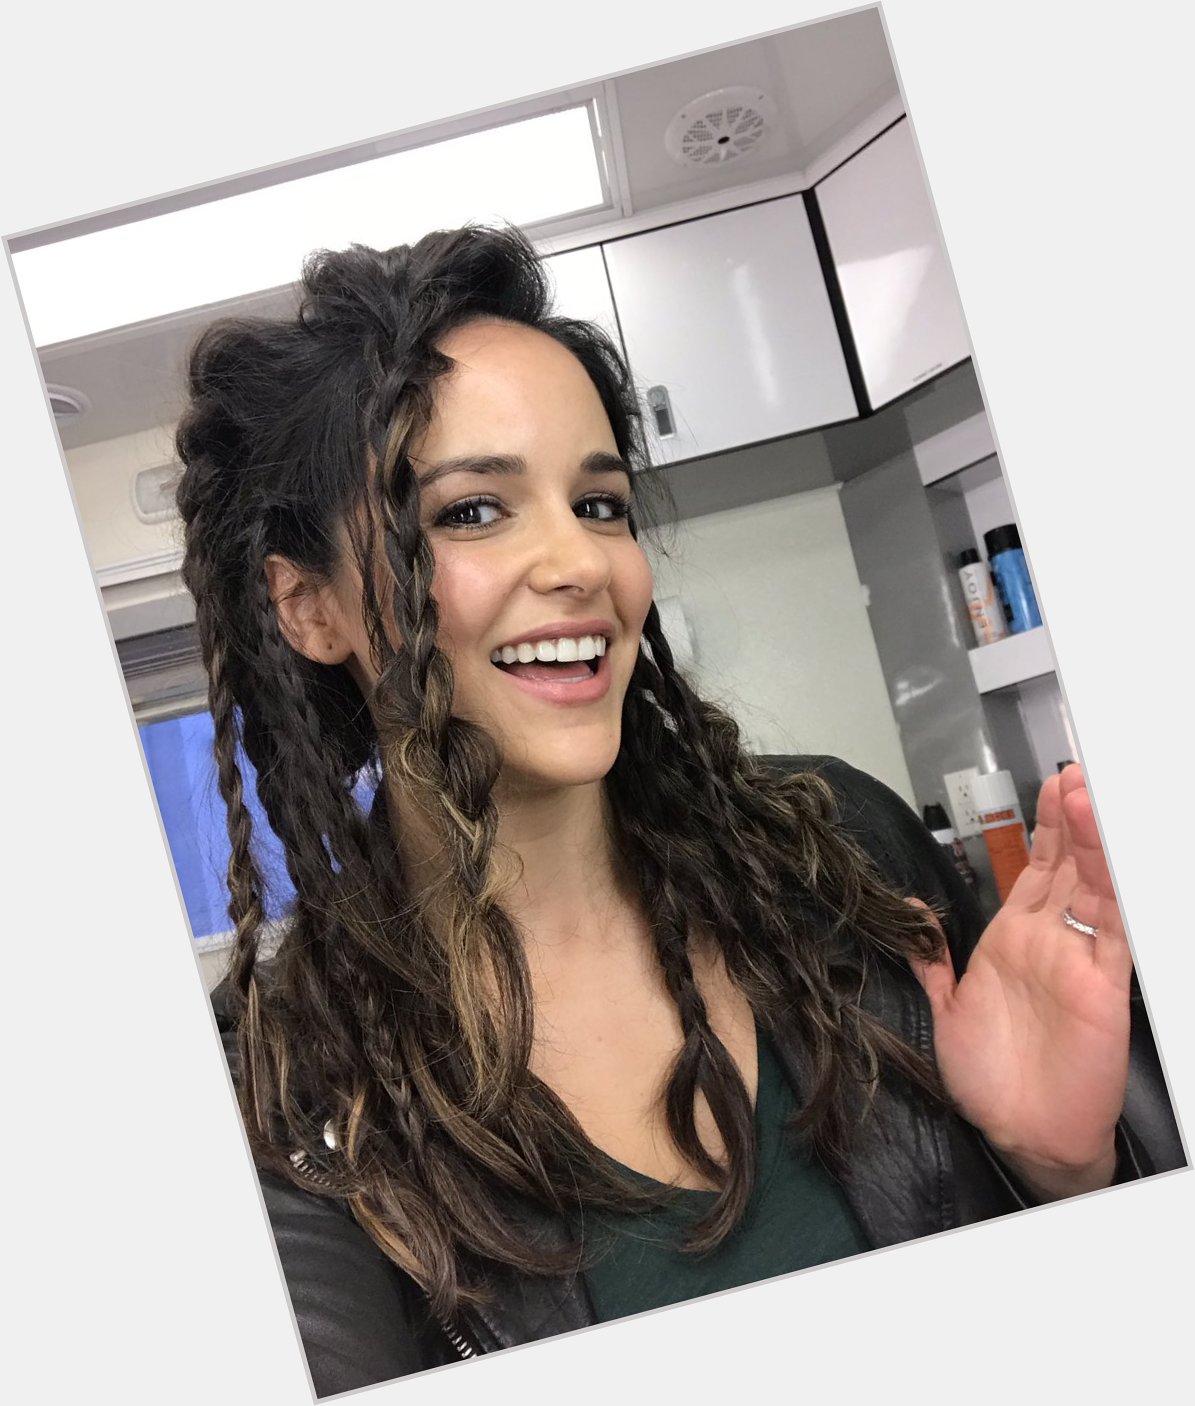 Happy belated birthday to the one amd only Melissa Fumero. Thank you for making every b99 fan smile. 